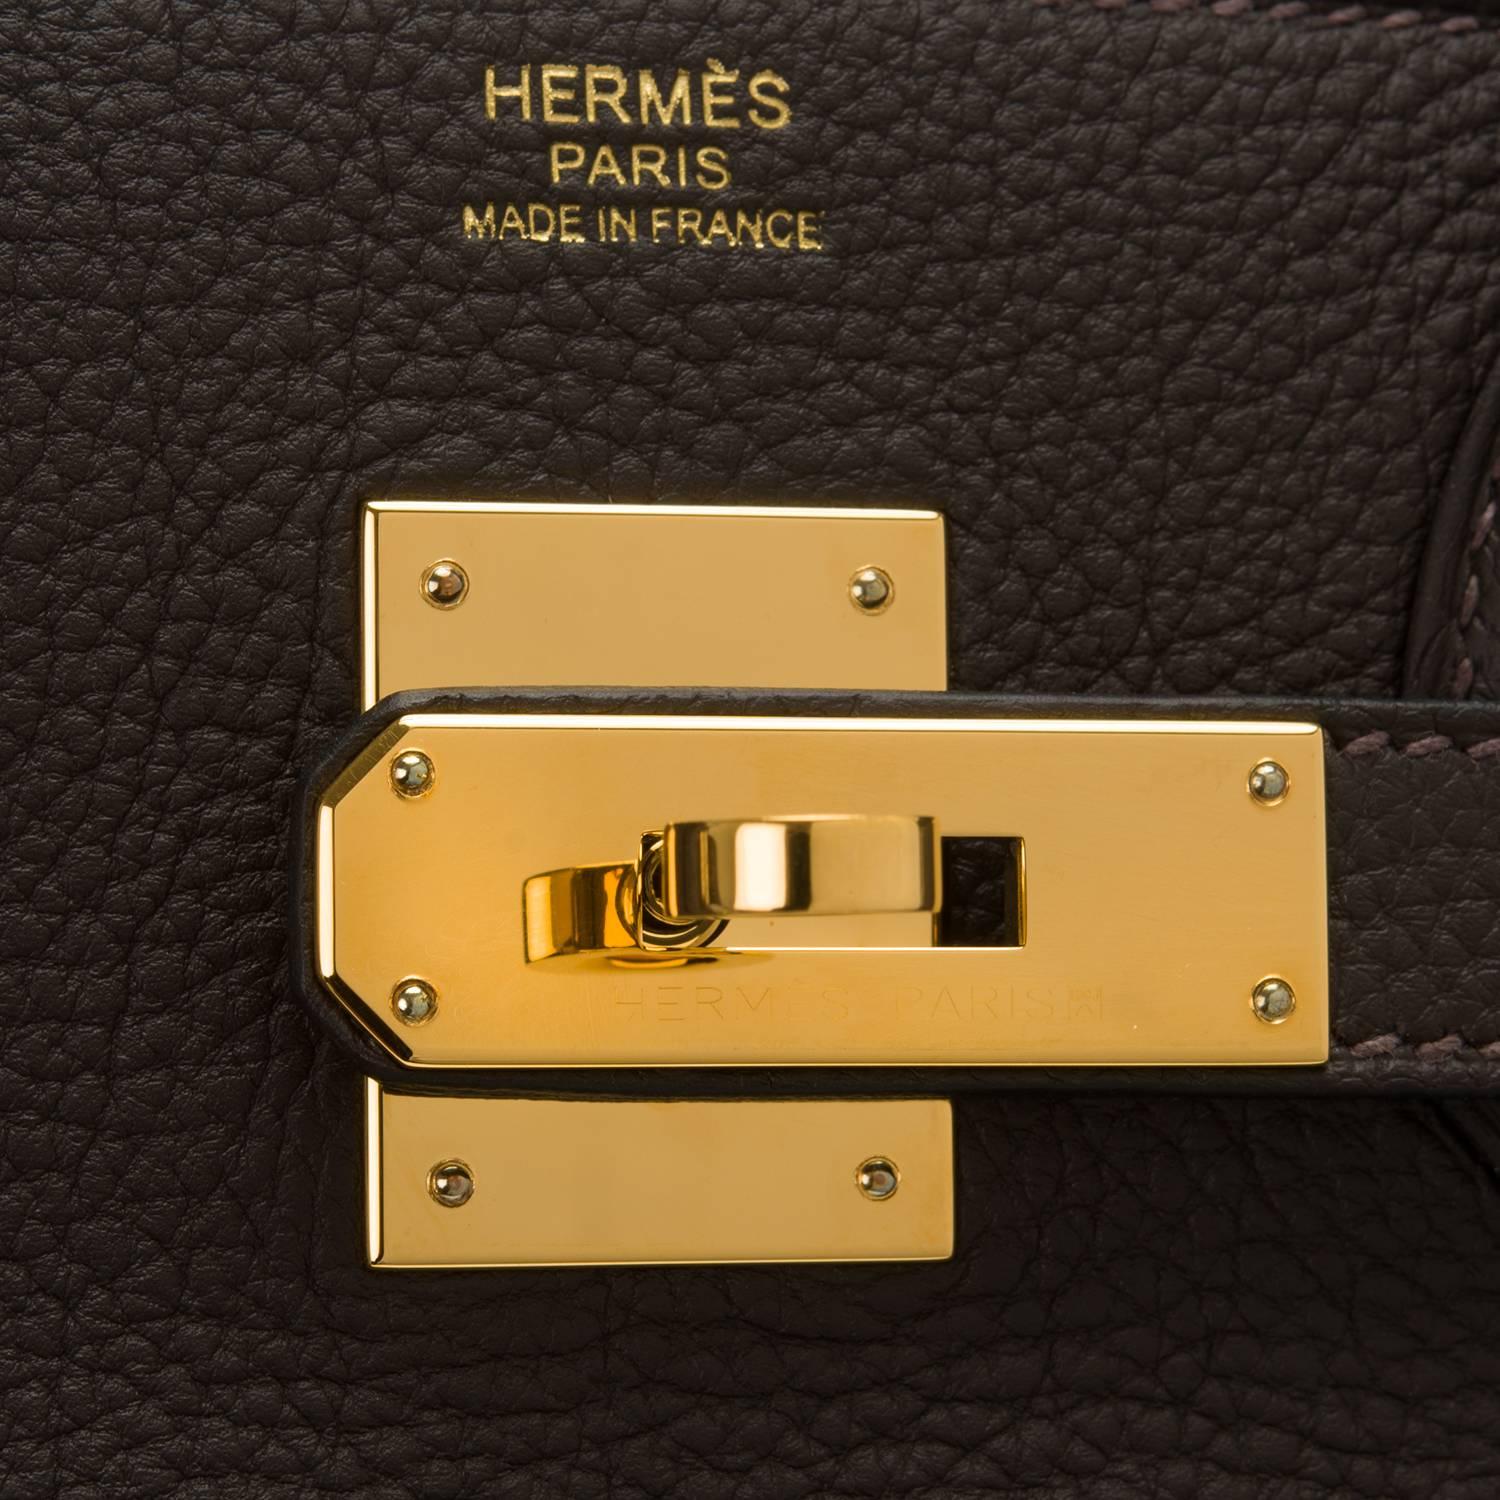 Hermes Macassar Ebony Togo Birkin 30cm Gold Hardware In Excellent Condition For Sale In New York, NY